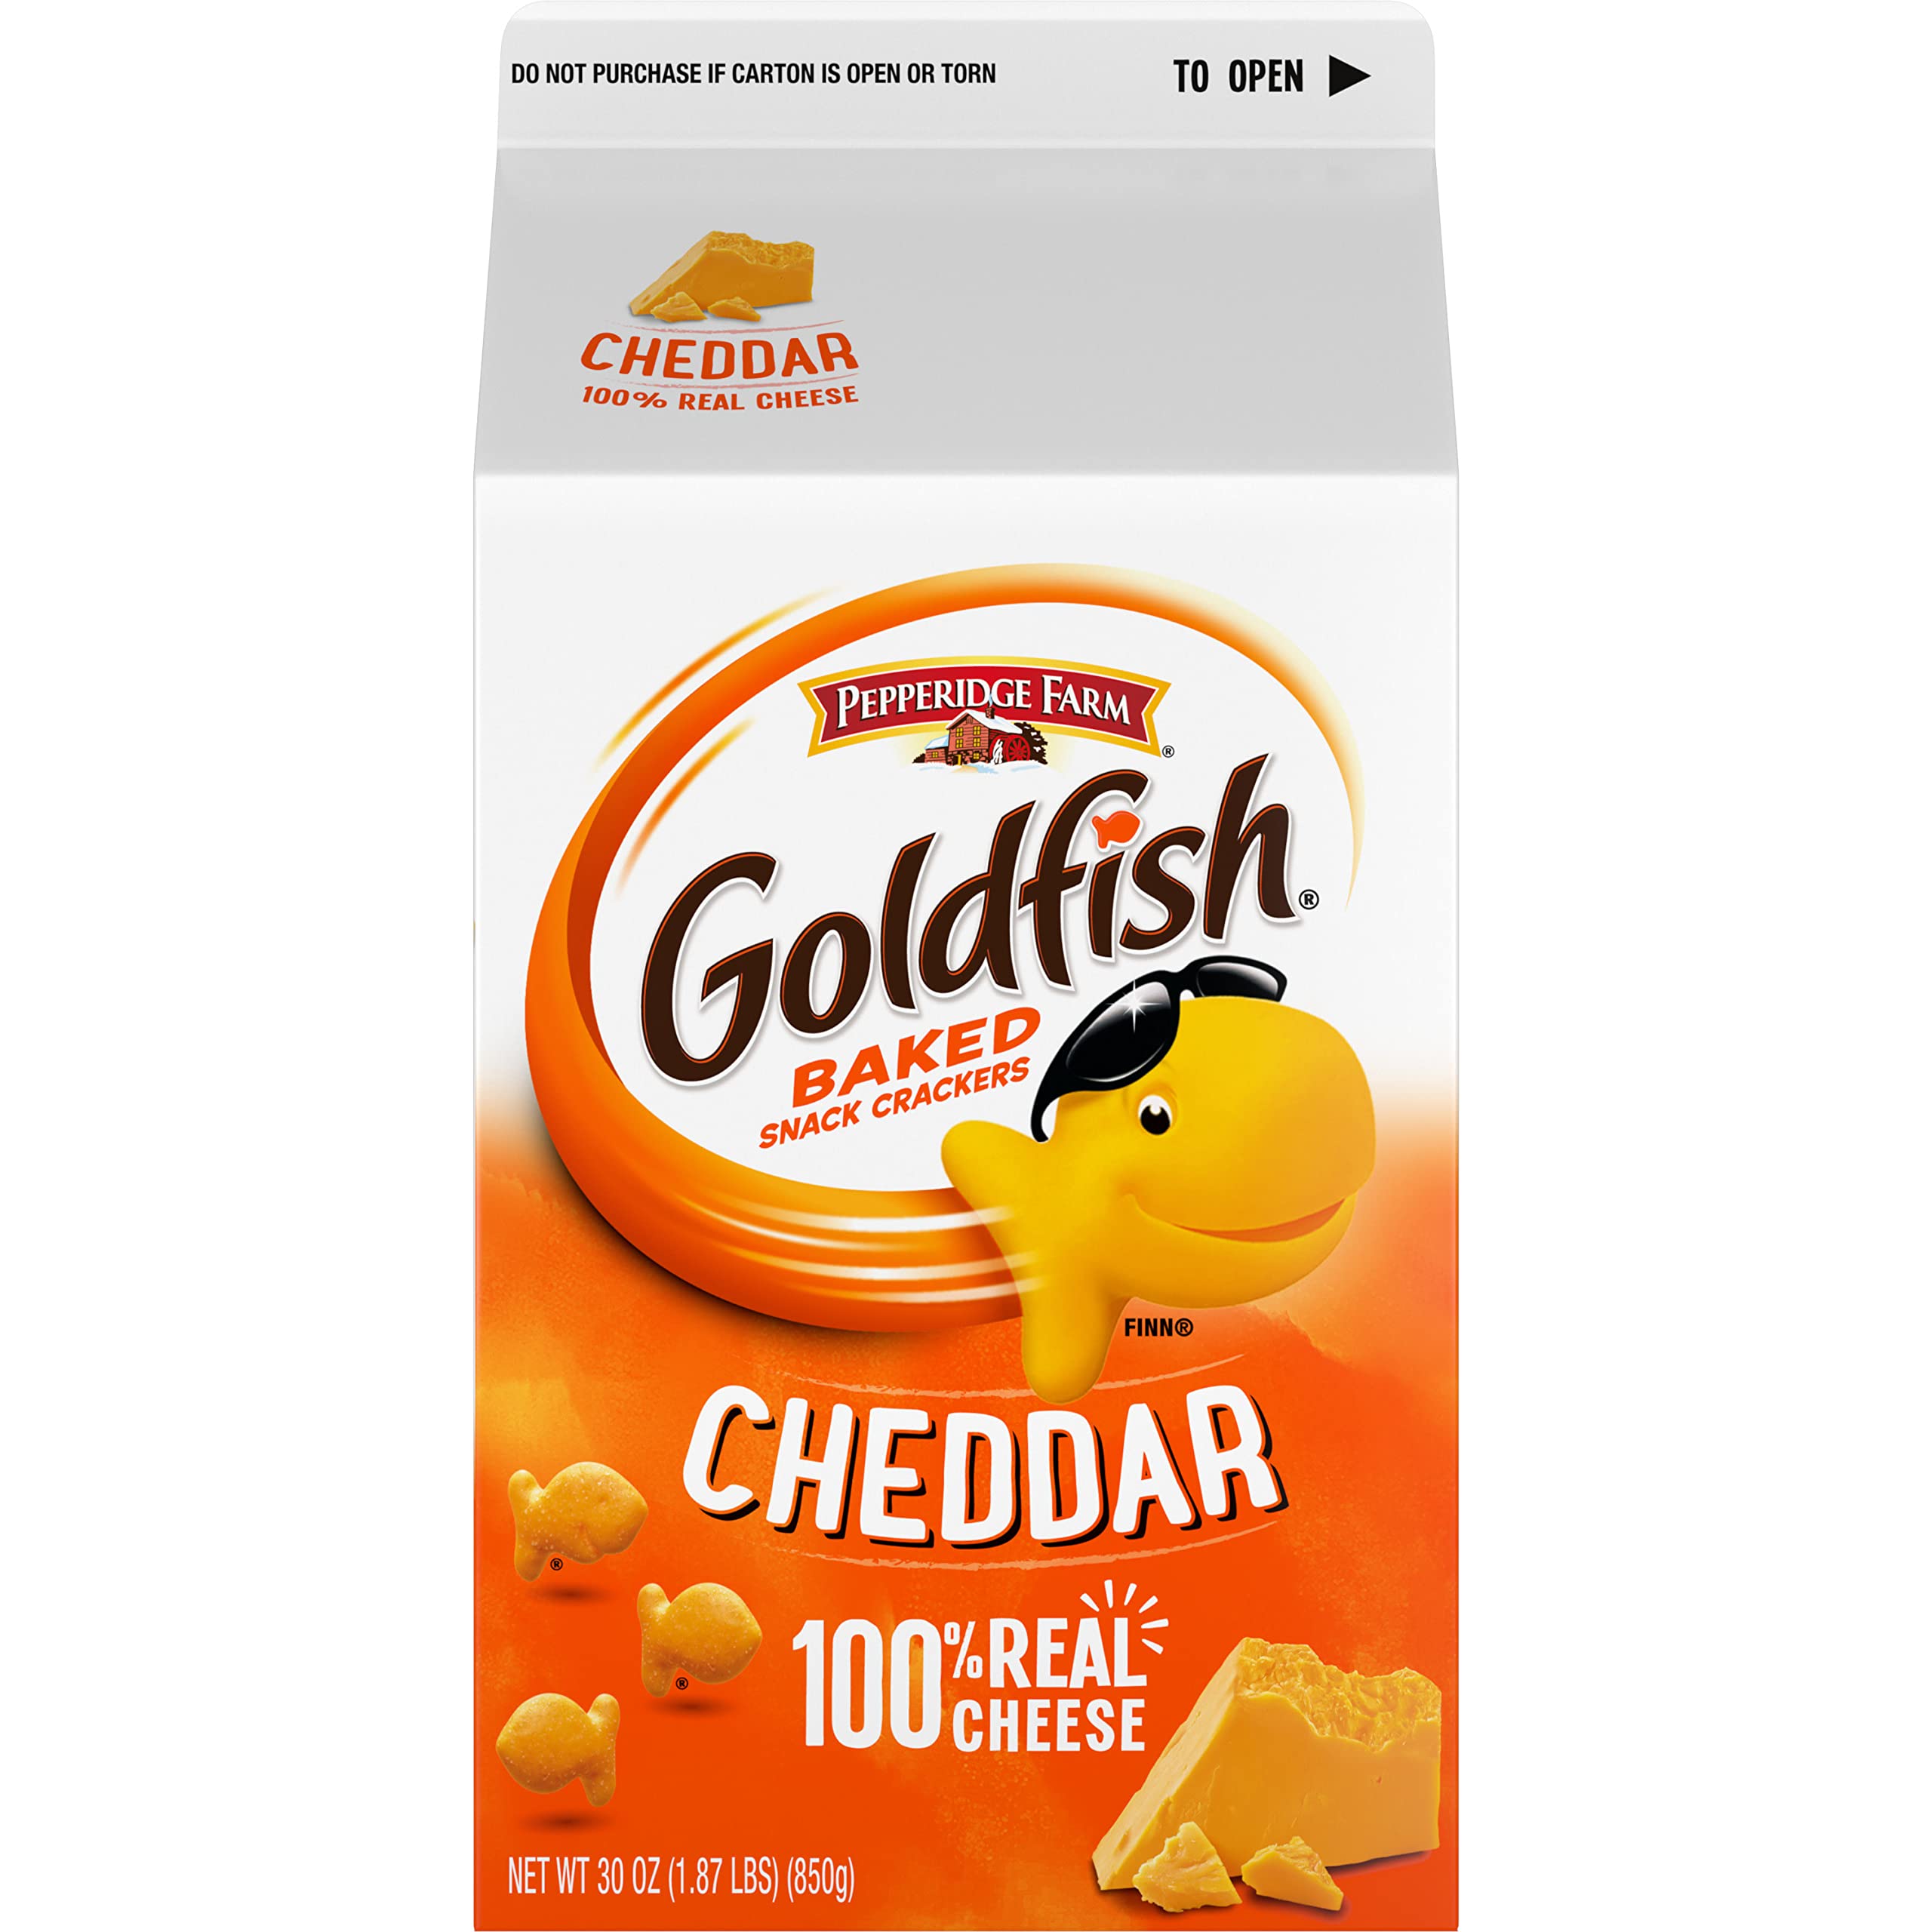 Goldfish Cheddar Cheese Crackers, Baked Snack Crackers, 30 oz Carton